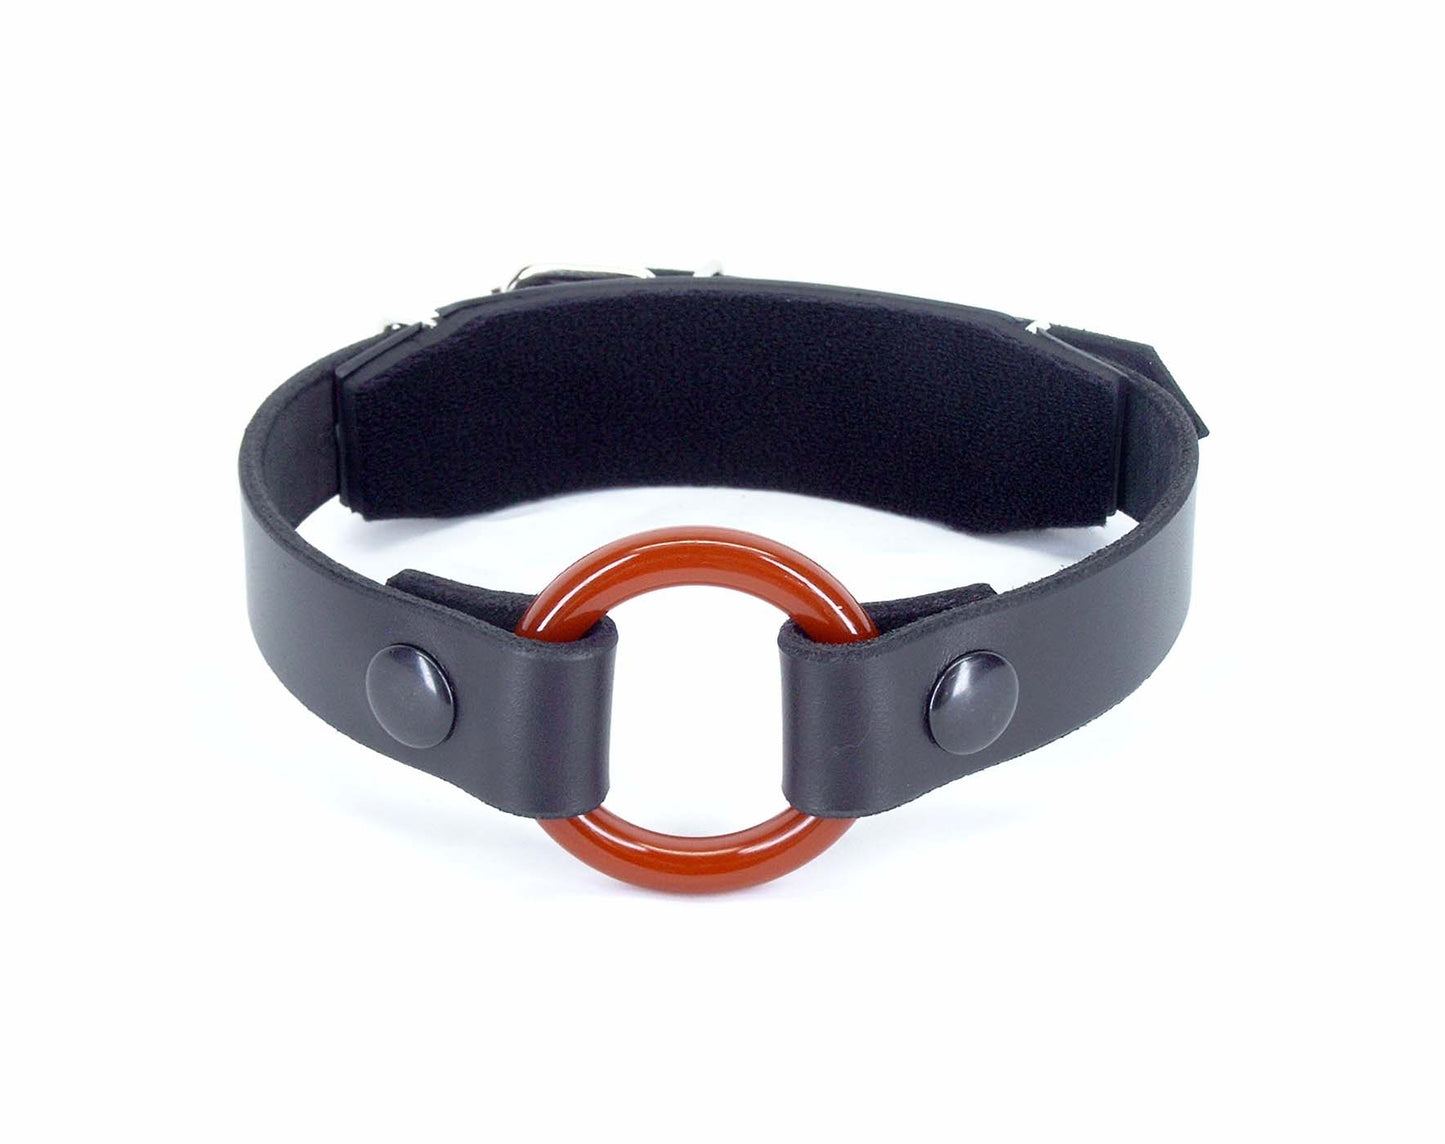 The comfort back O-ring gag with red dental safe O-ring against white background.